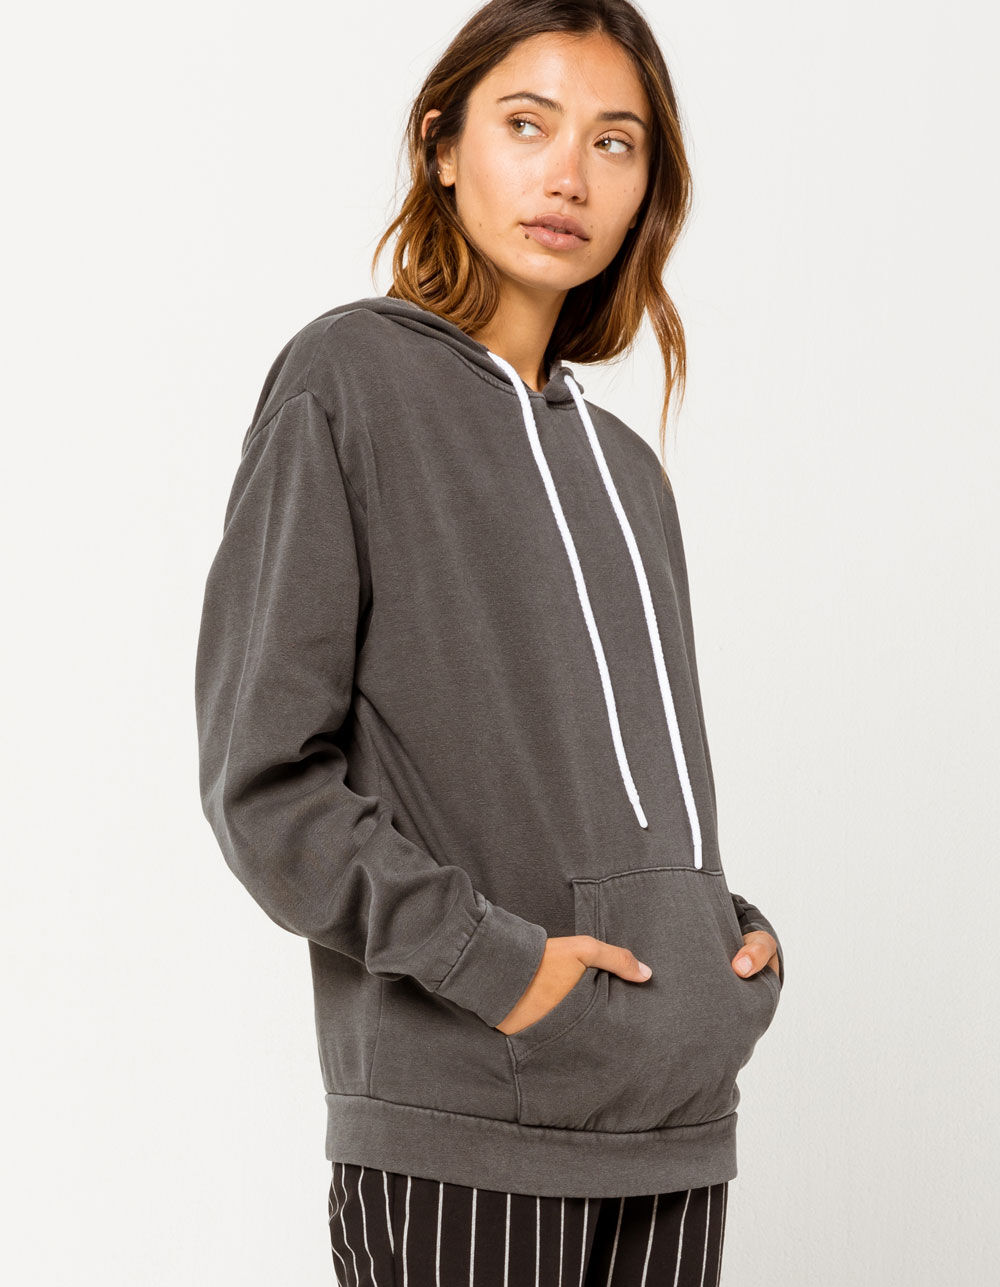 SKY AND SPARROW Mineral Womens Oversized Hoodie image number 1